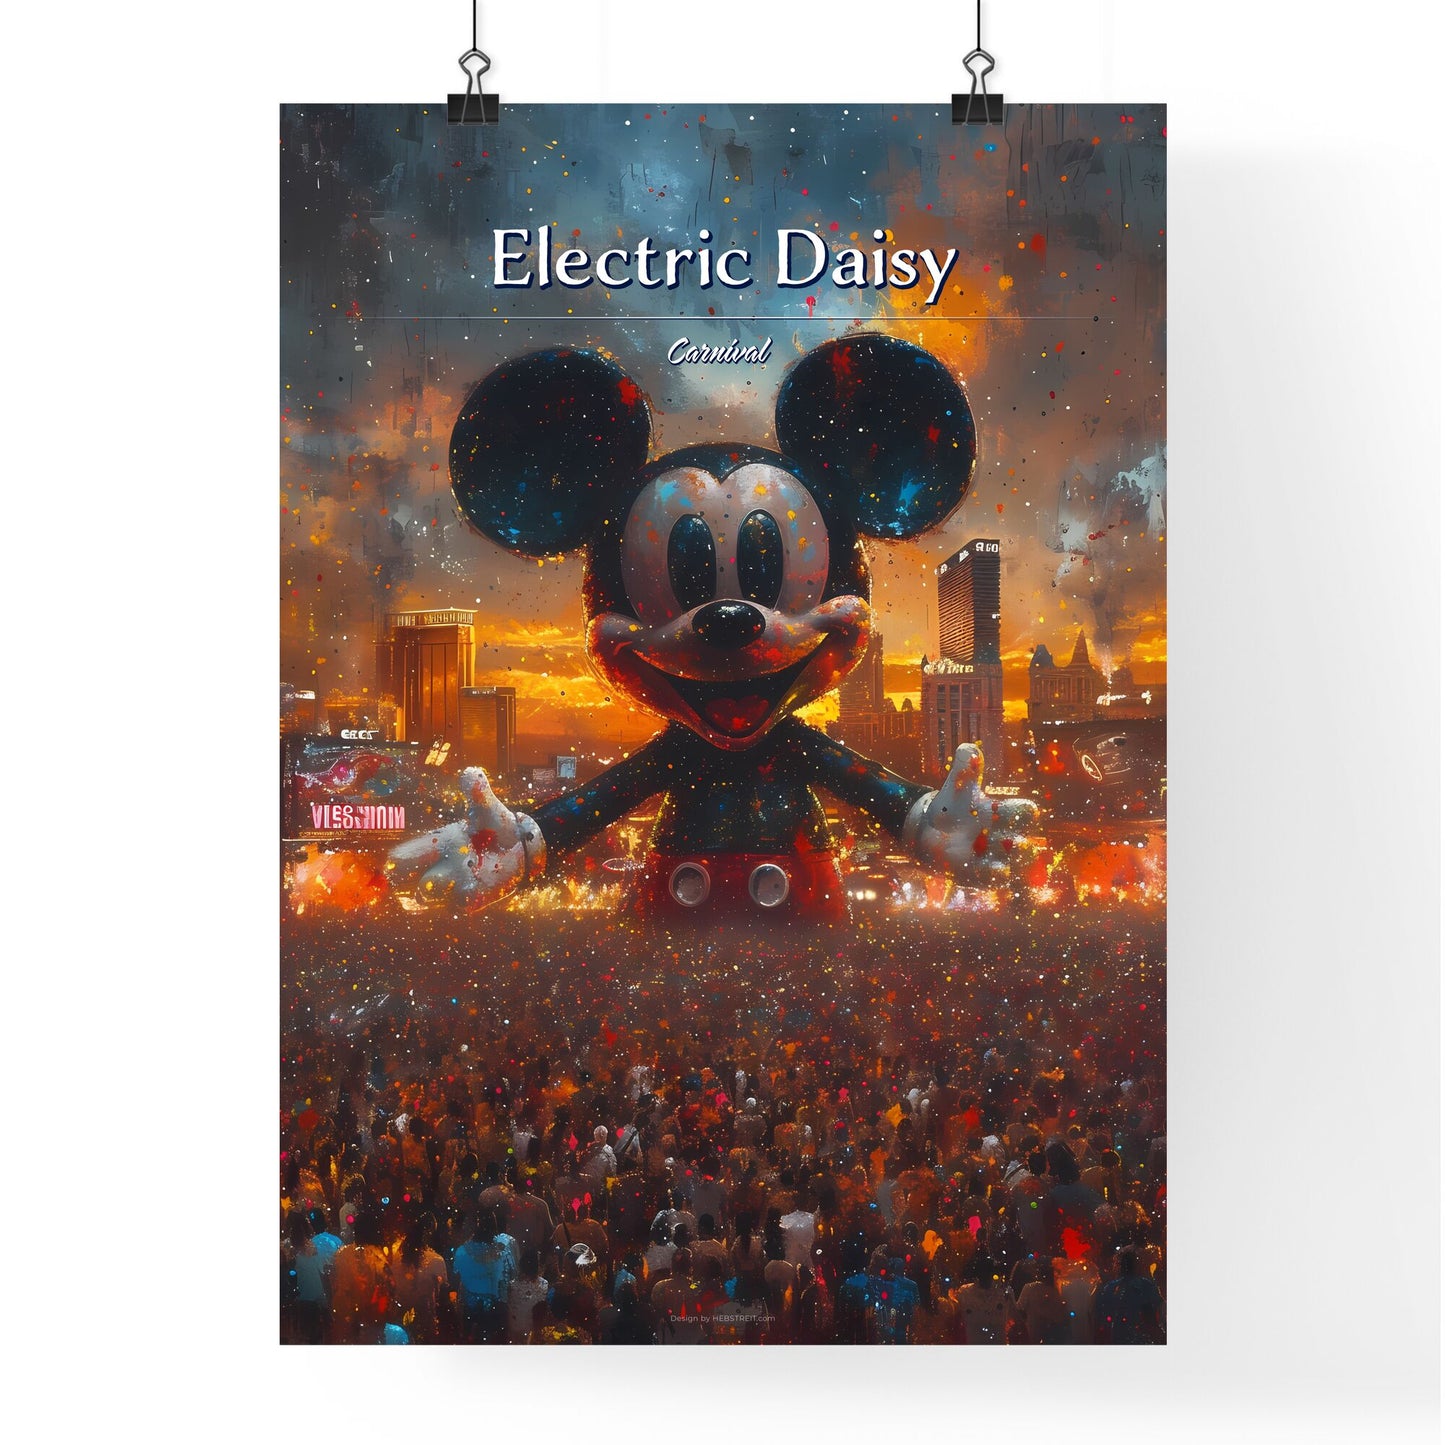 Electric Daisy Carnival (EDC) - Art print of a large crowd of people in front of a cartoon character Default Title